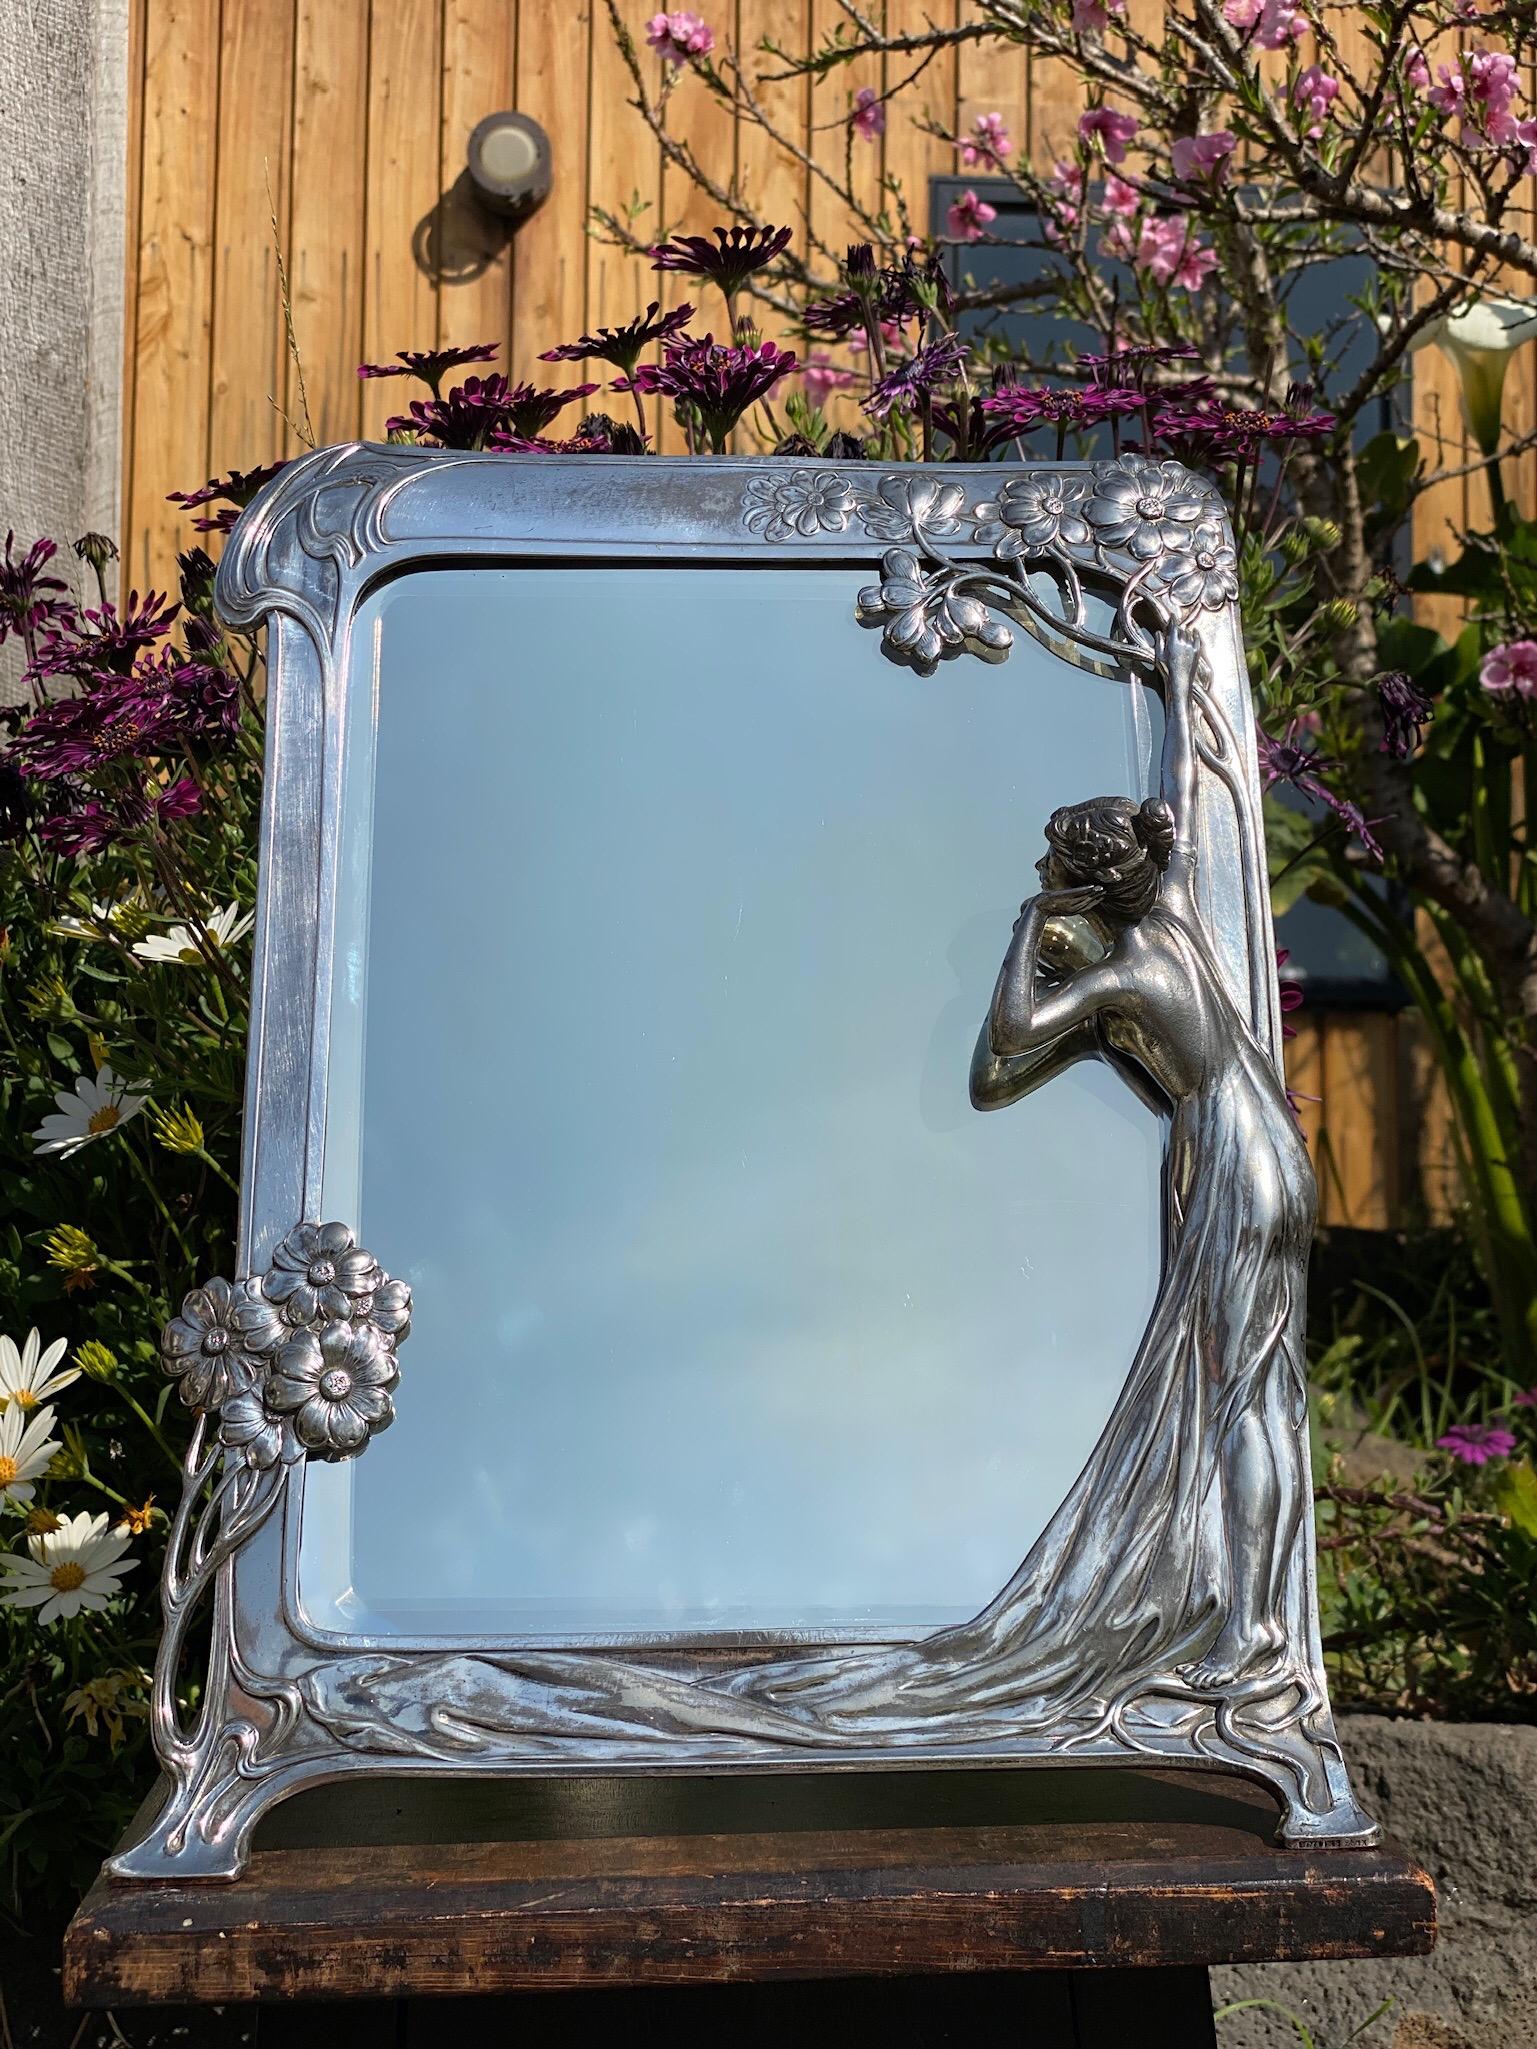 WMF Jugendstil, Art Nouveau Table Mirror, 'The First Cuckoo', EP, c. 1906 For Sale 4